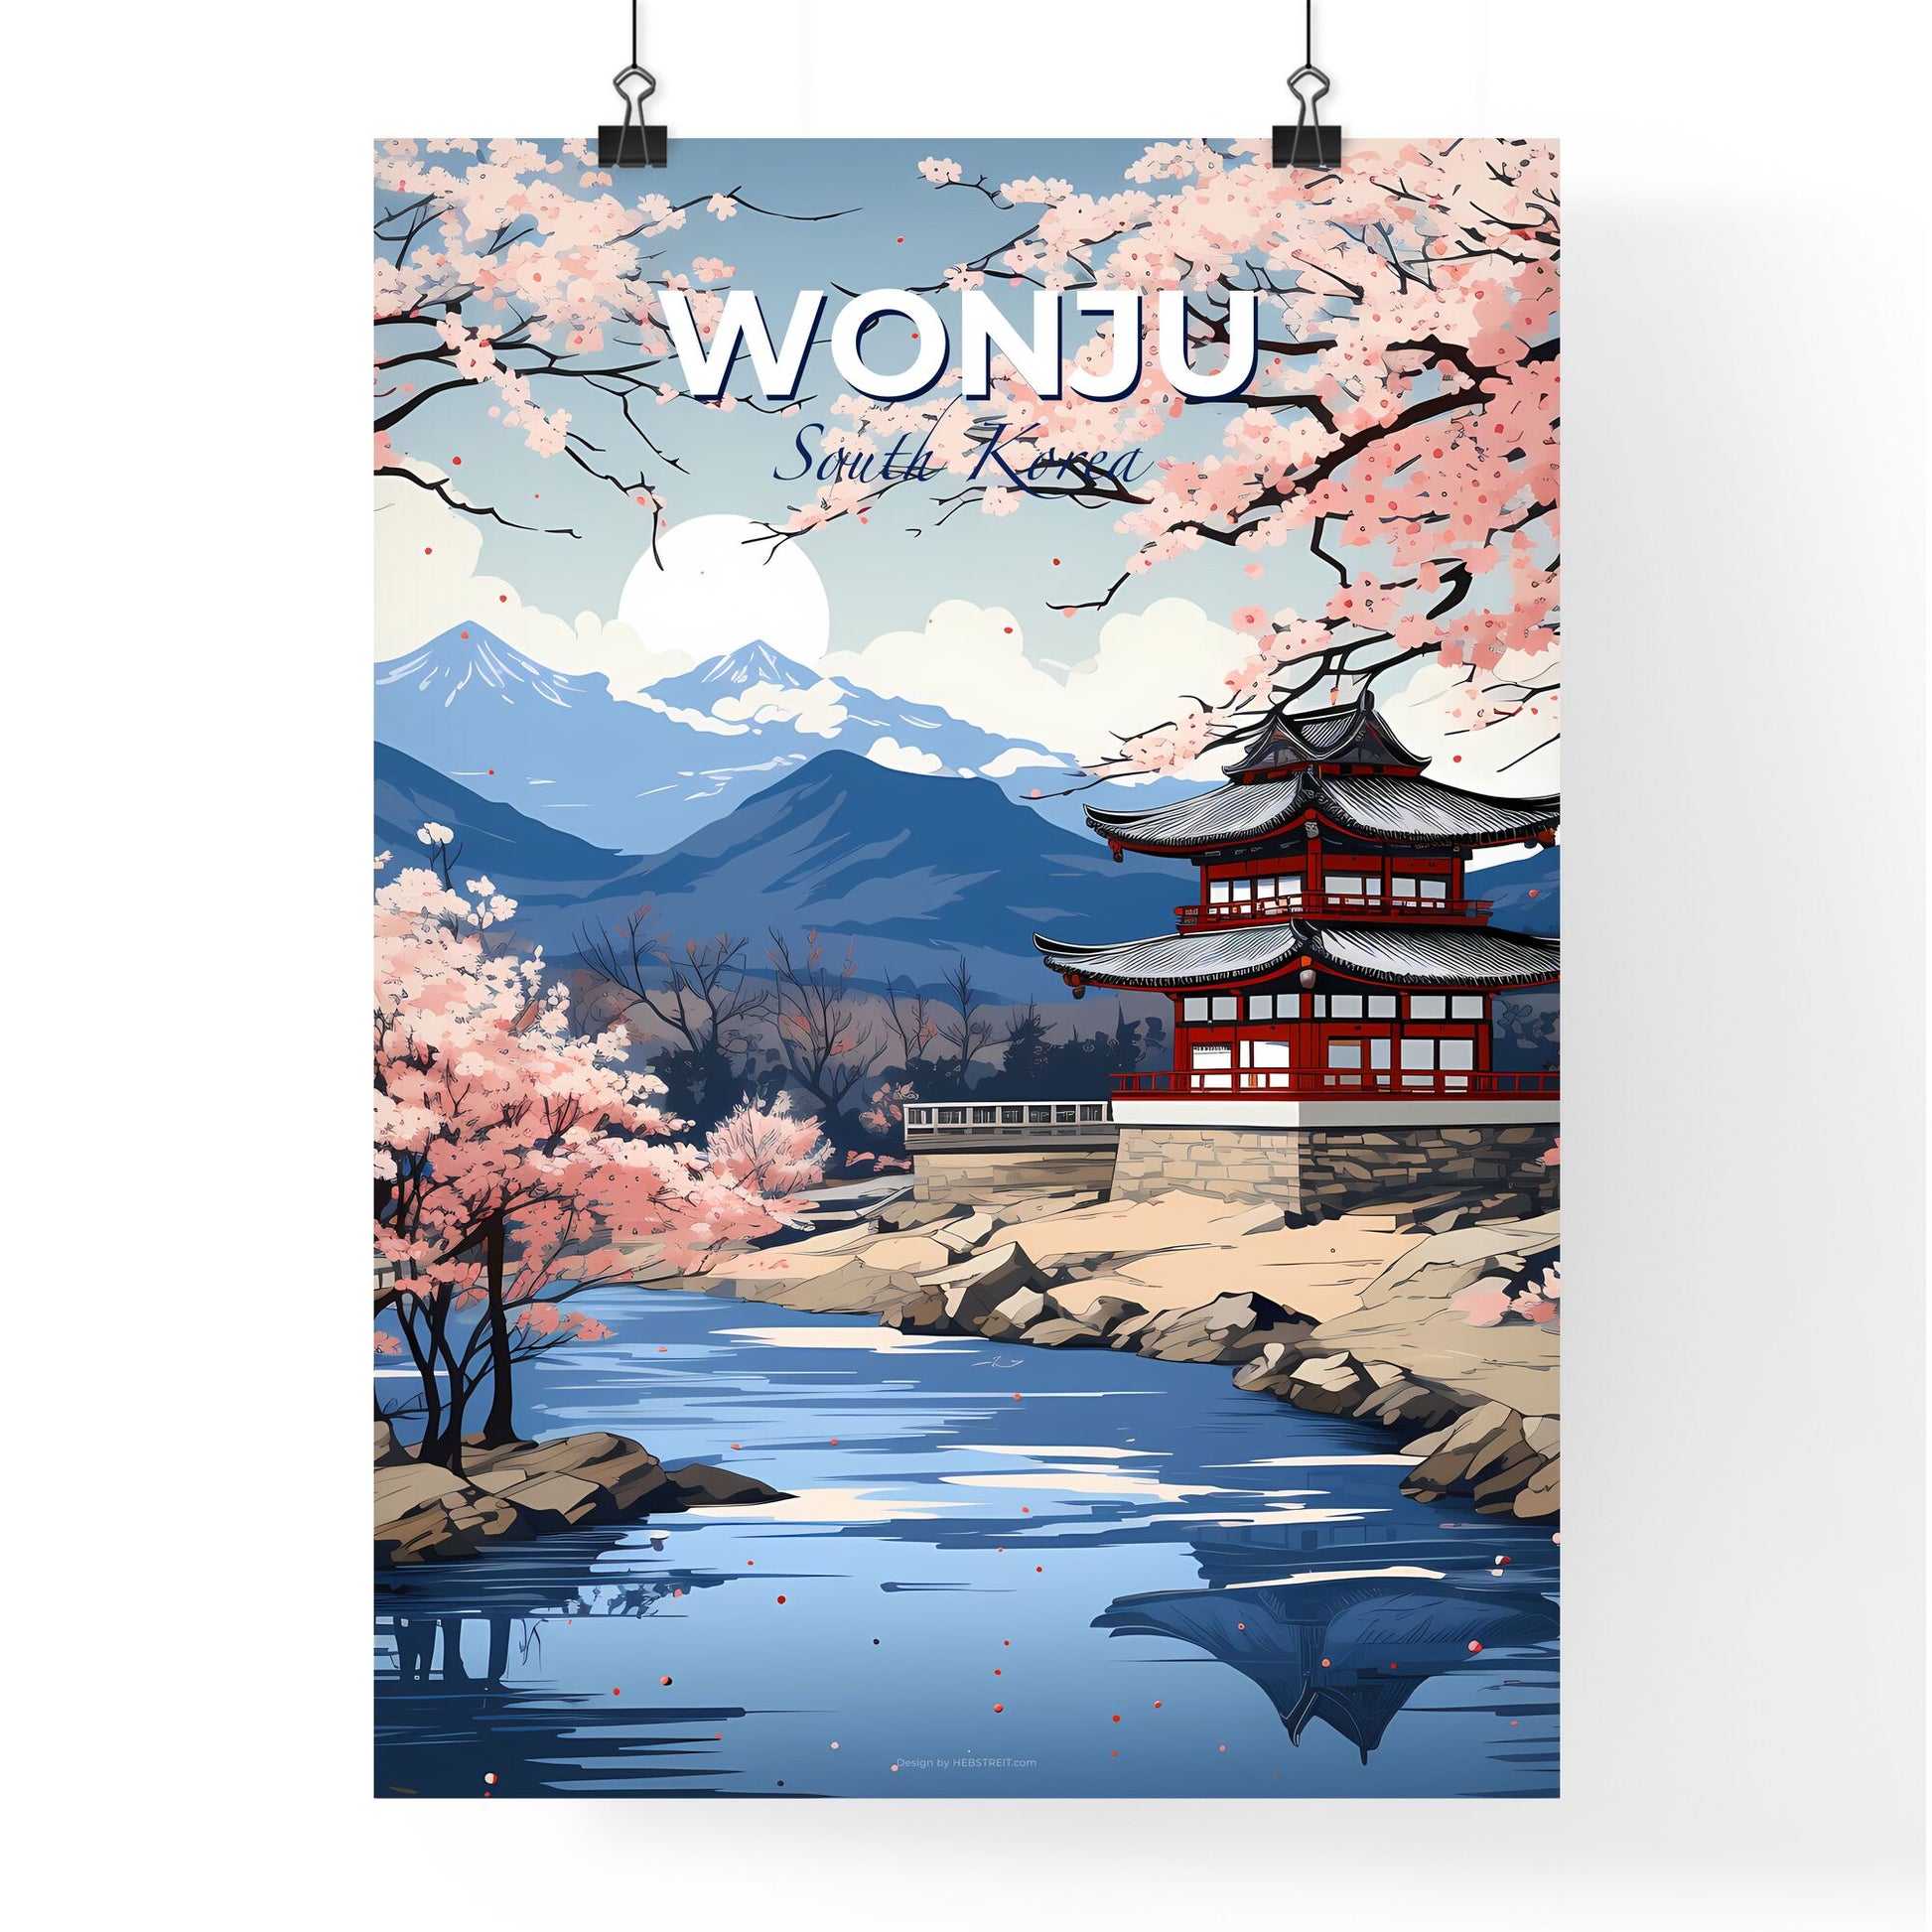 Vibrant Art Painting of Wonju South Korea Skyline with Pagoda Building by the River Default Title